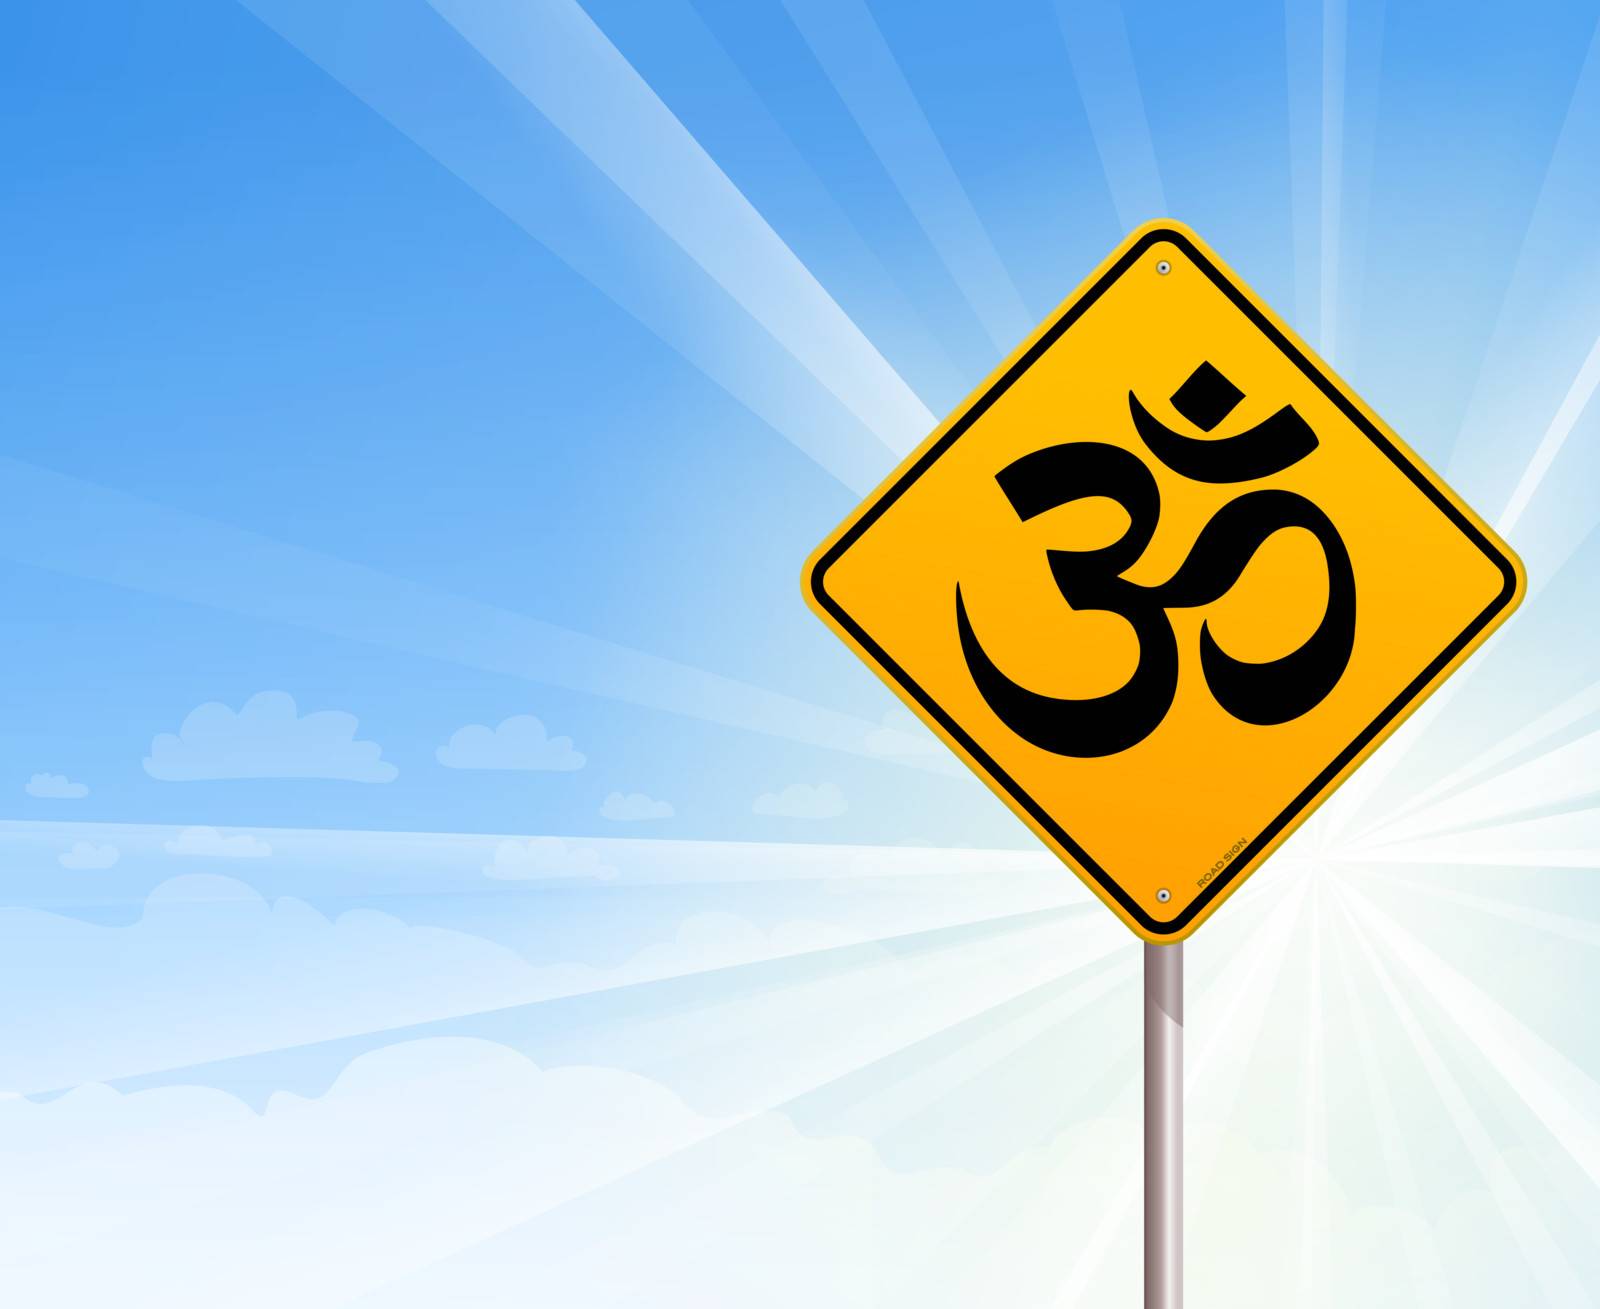 Spiritual symbol on yellow background and with blue sky and sunshine behind